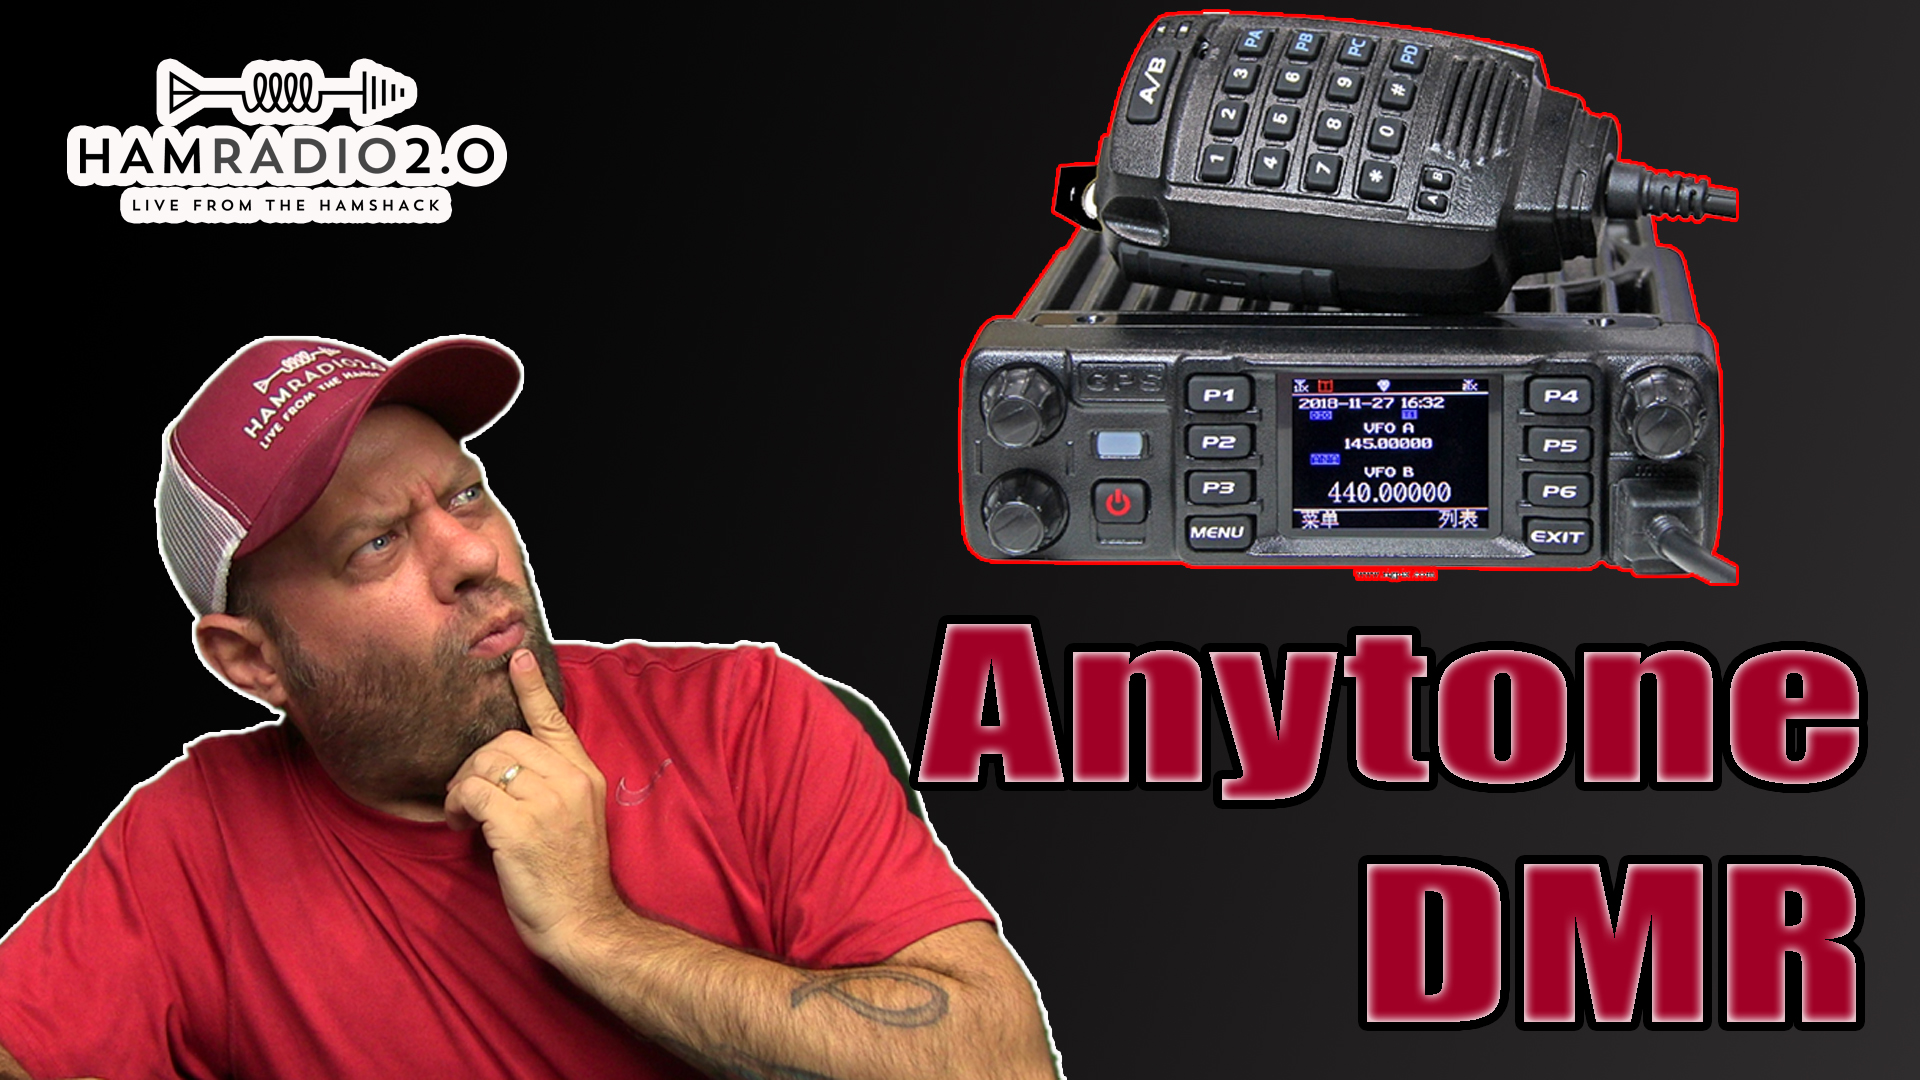 Episode 287: Anytone AT-D578UV Pro DMR Mobile Radio | First Look!